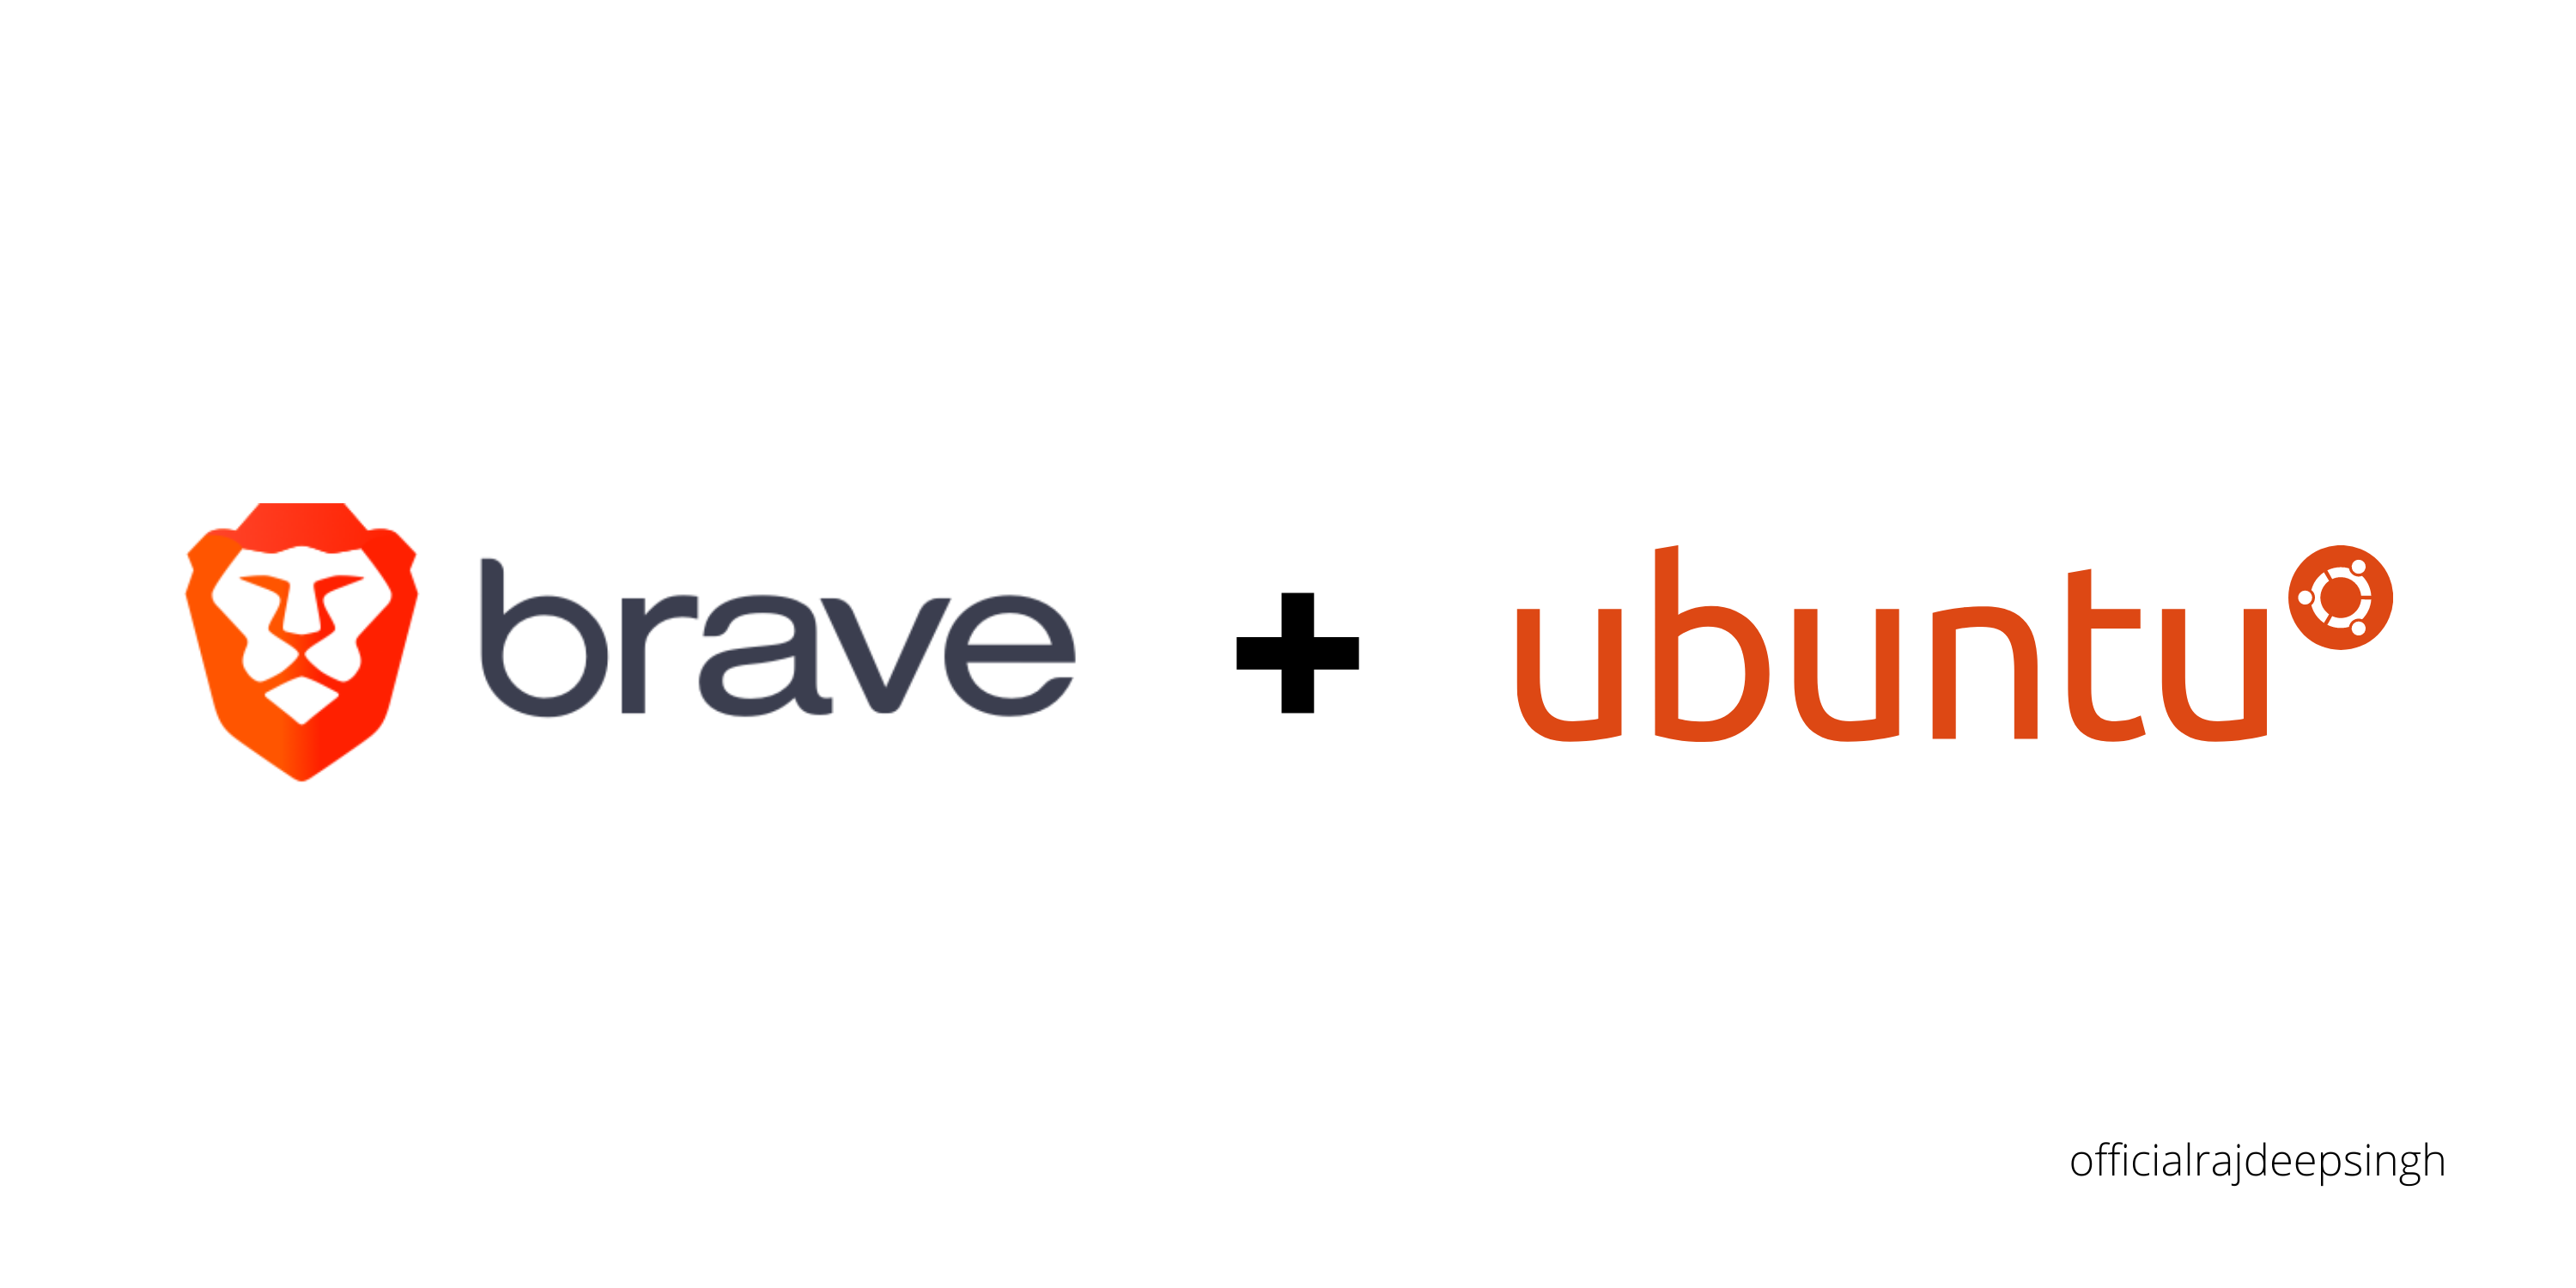 How to install brave browser in Ubuntu ( 22.04 )